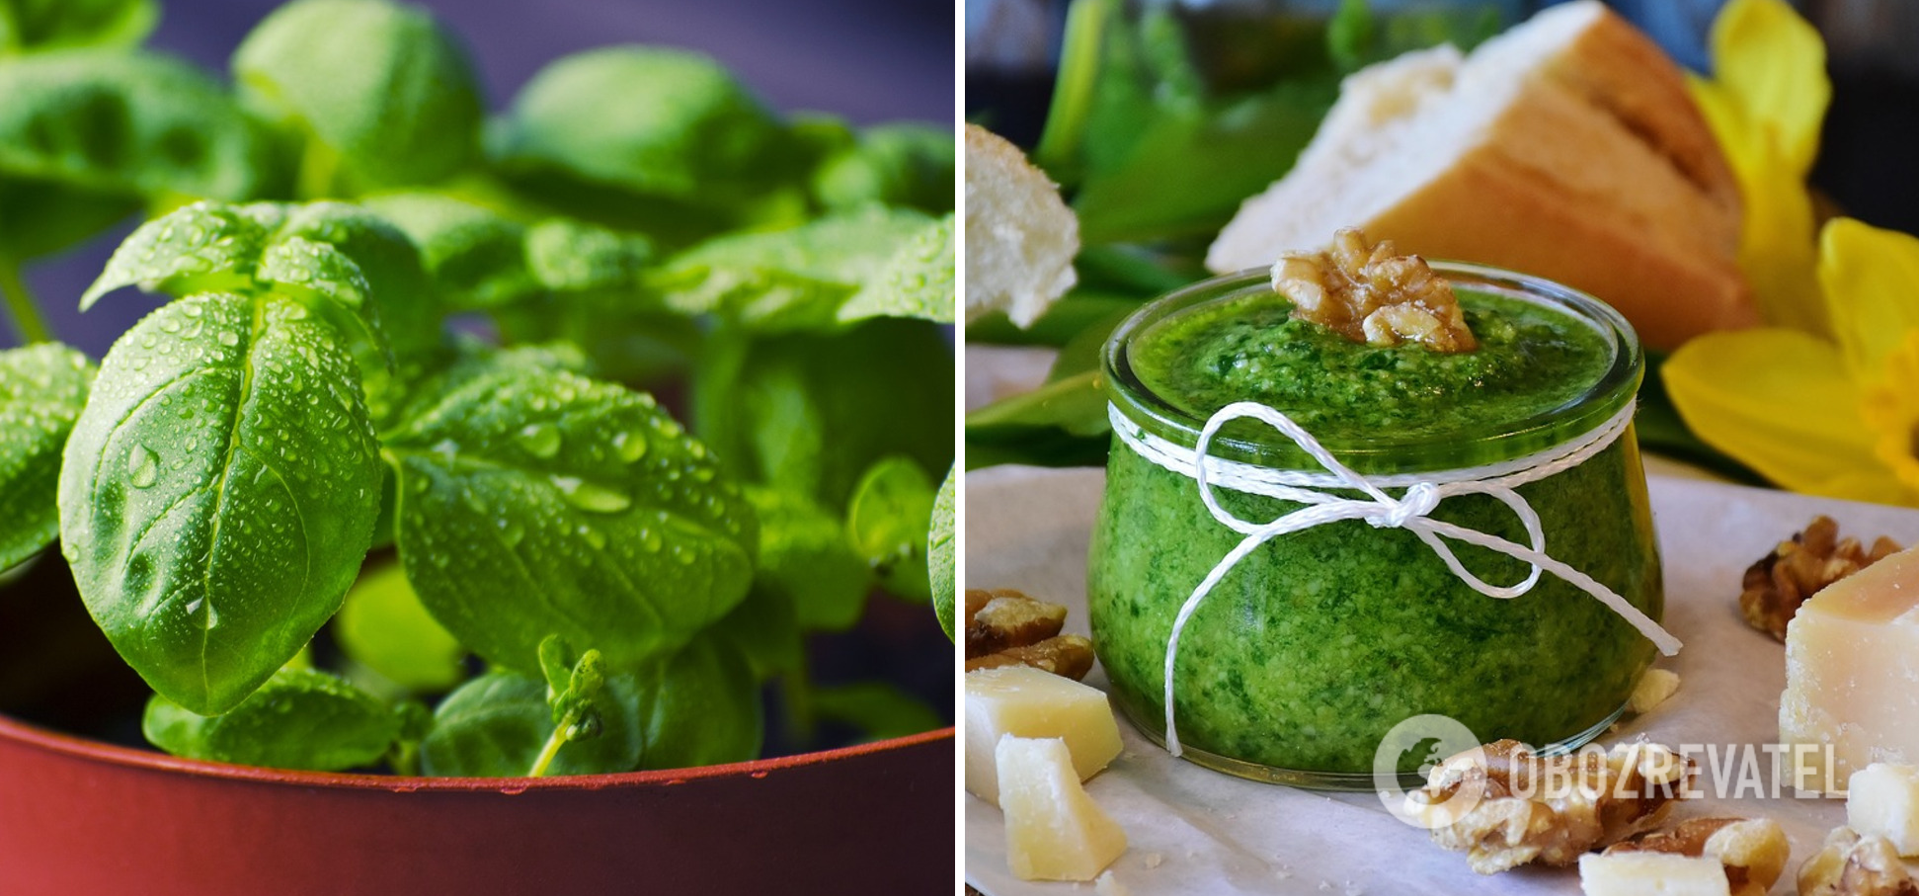 A versatile pesto sauce for soups, salads and sandwiches: can be frozen for the winter